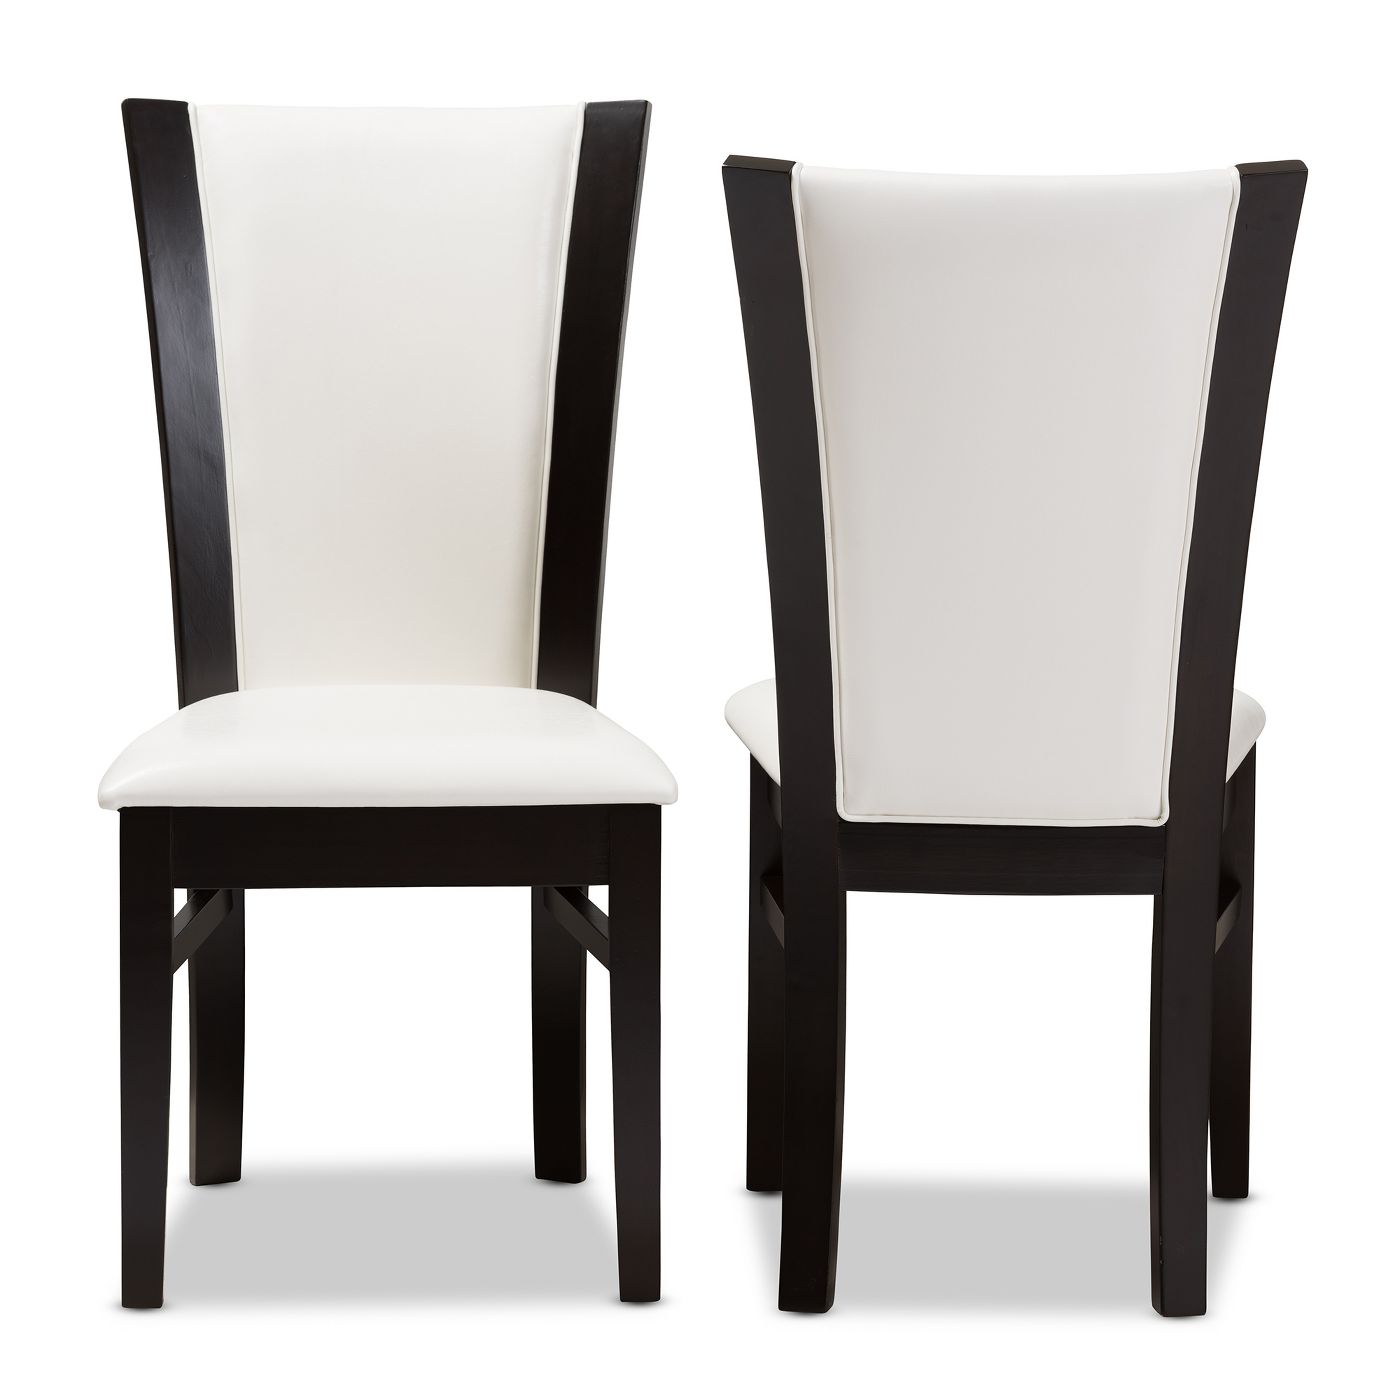 Set of 4 Adley Modern Faux Leather Dining Chairs White/Dark Brown 2006 (2 boxes)